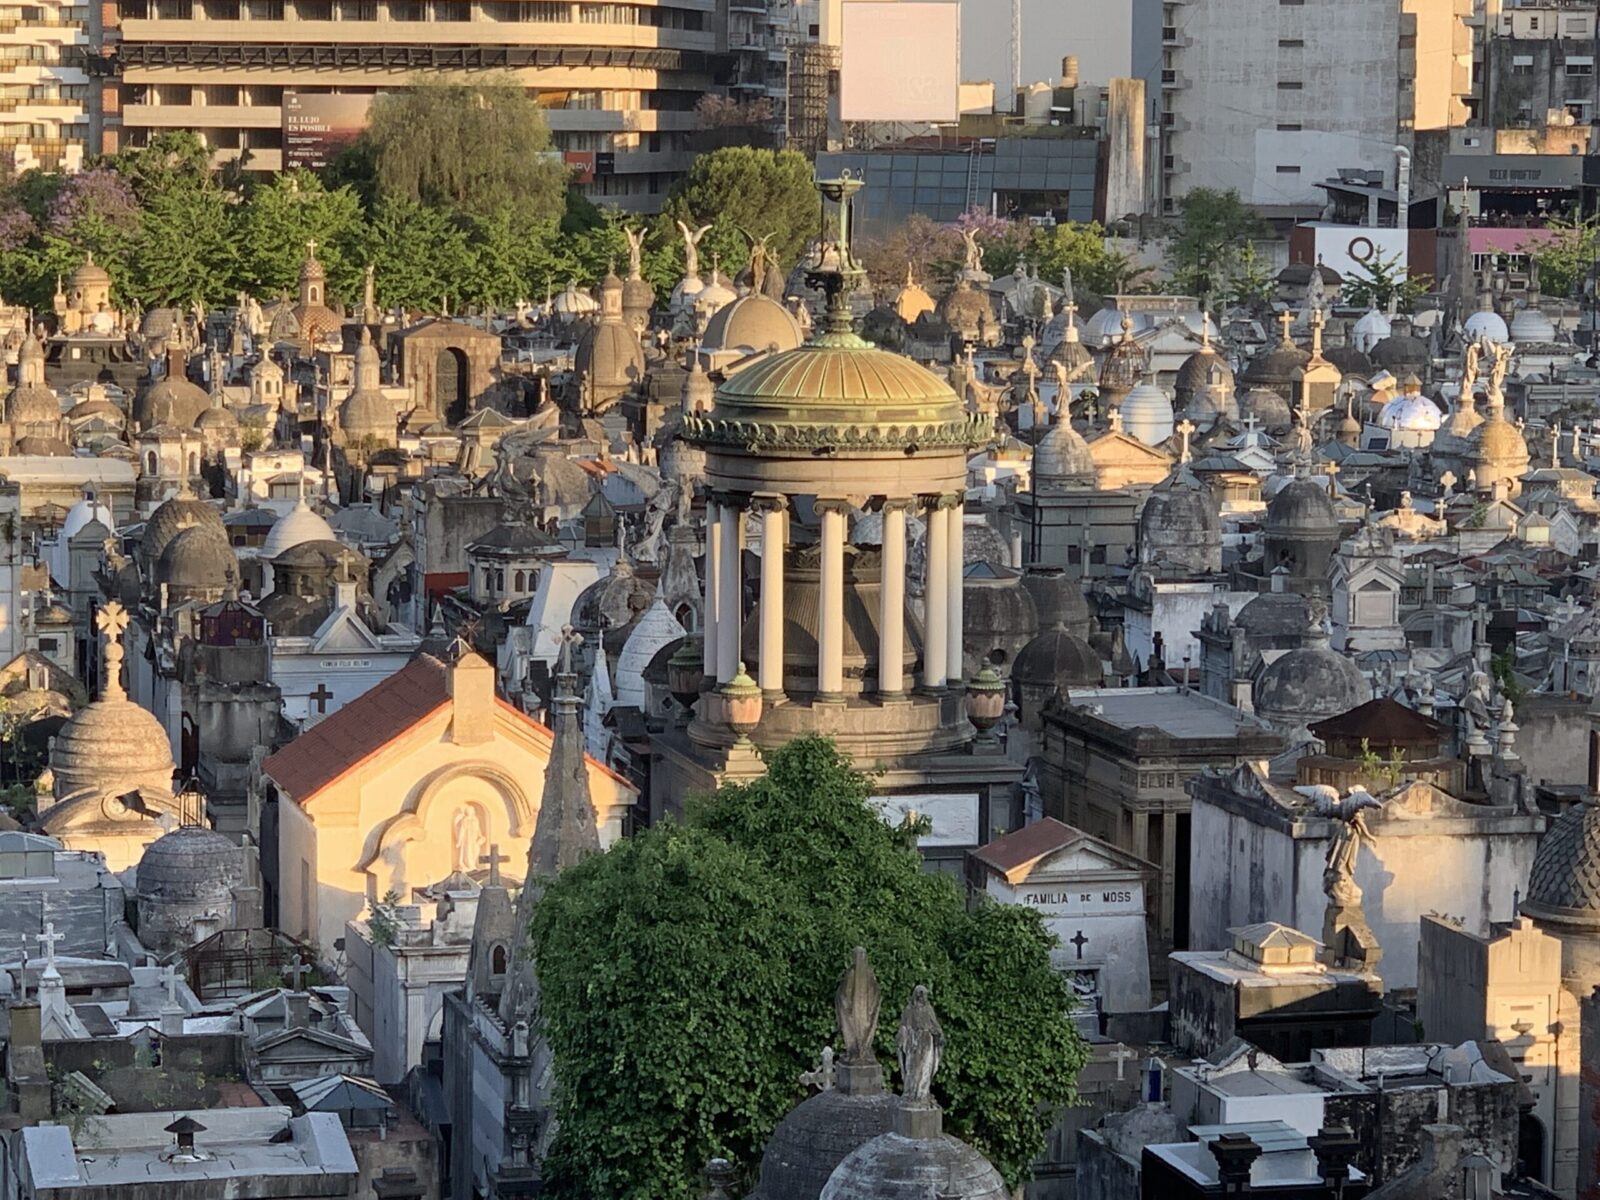 tombs and mausoleums at Recoleta Cemetery